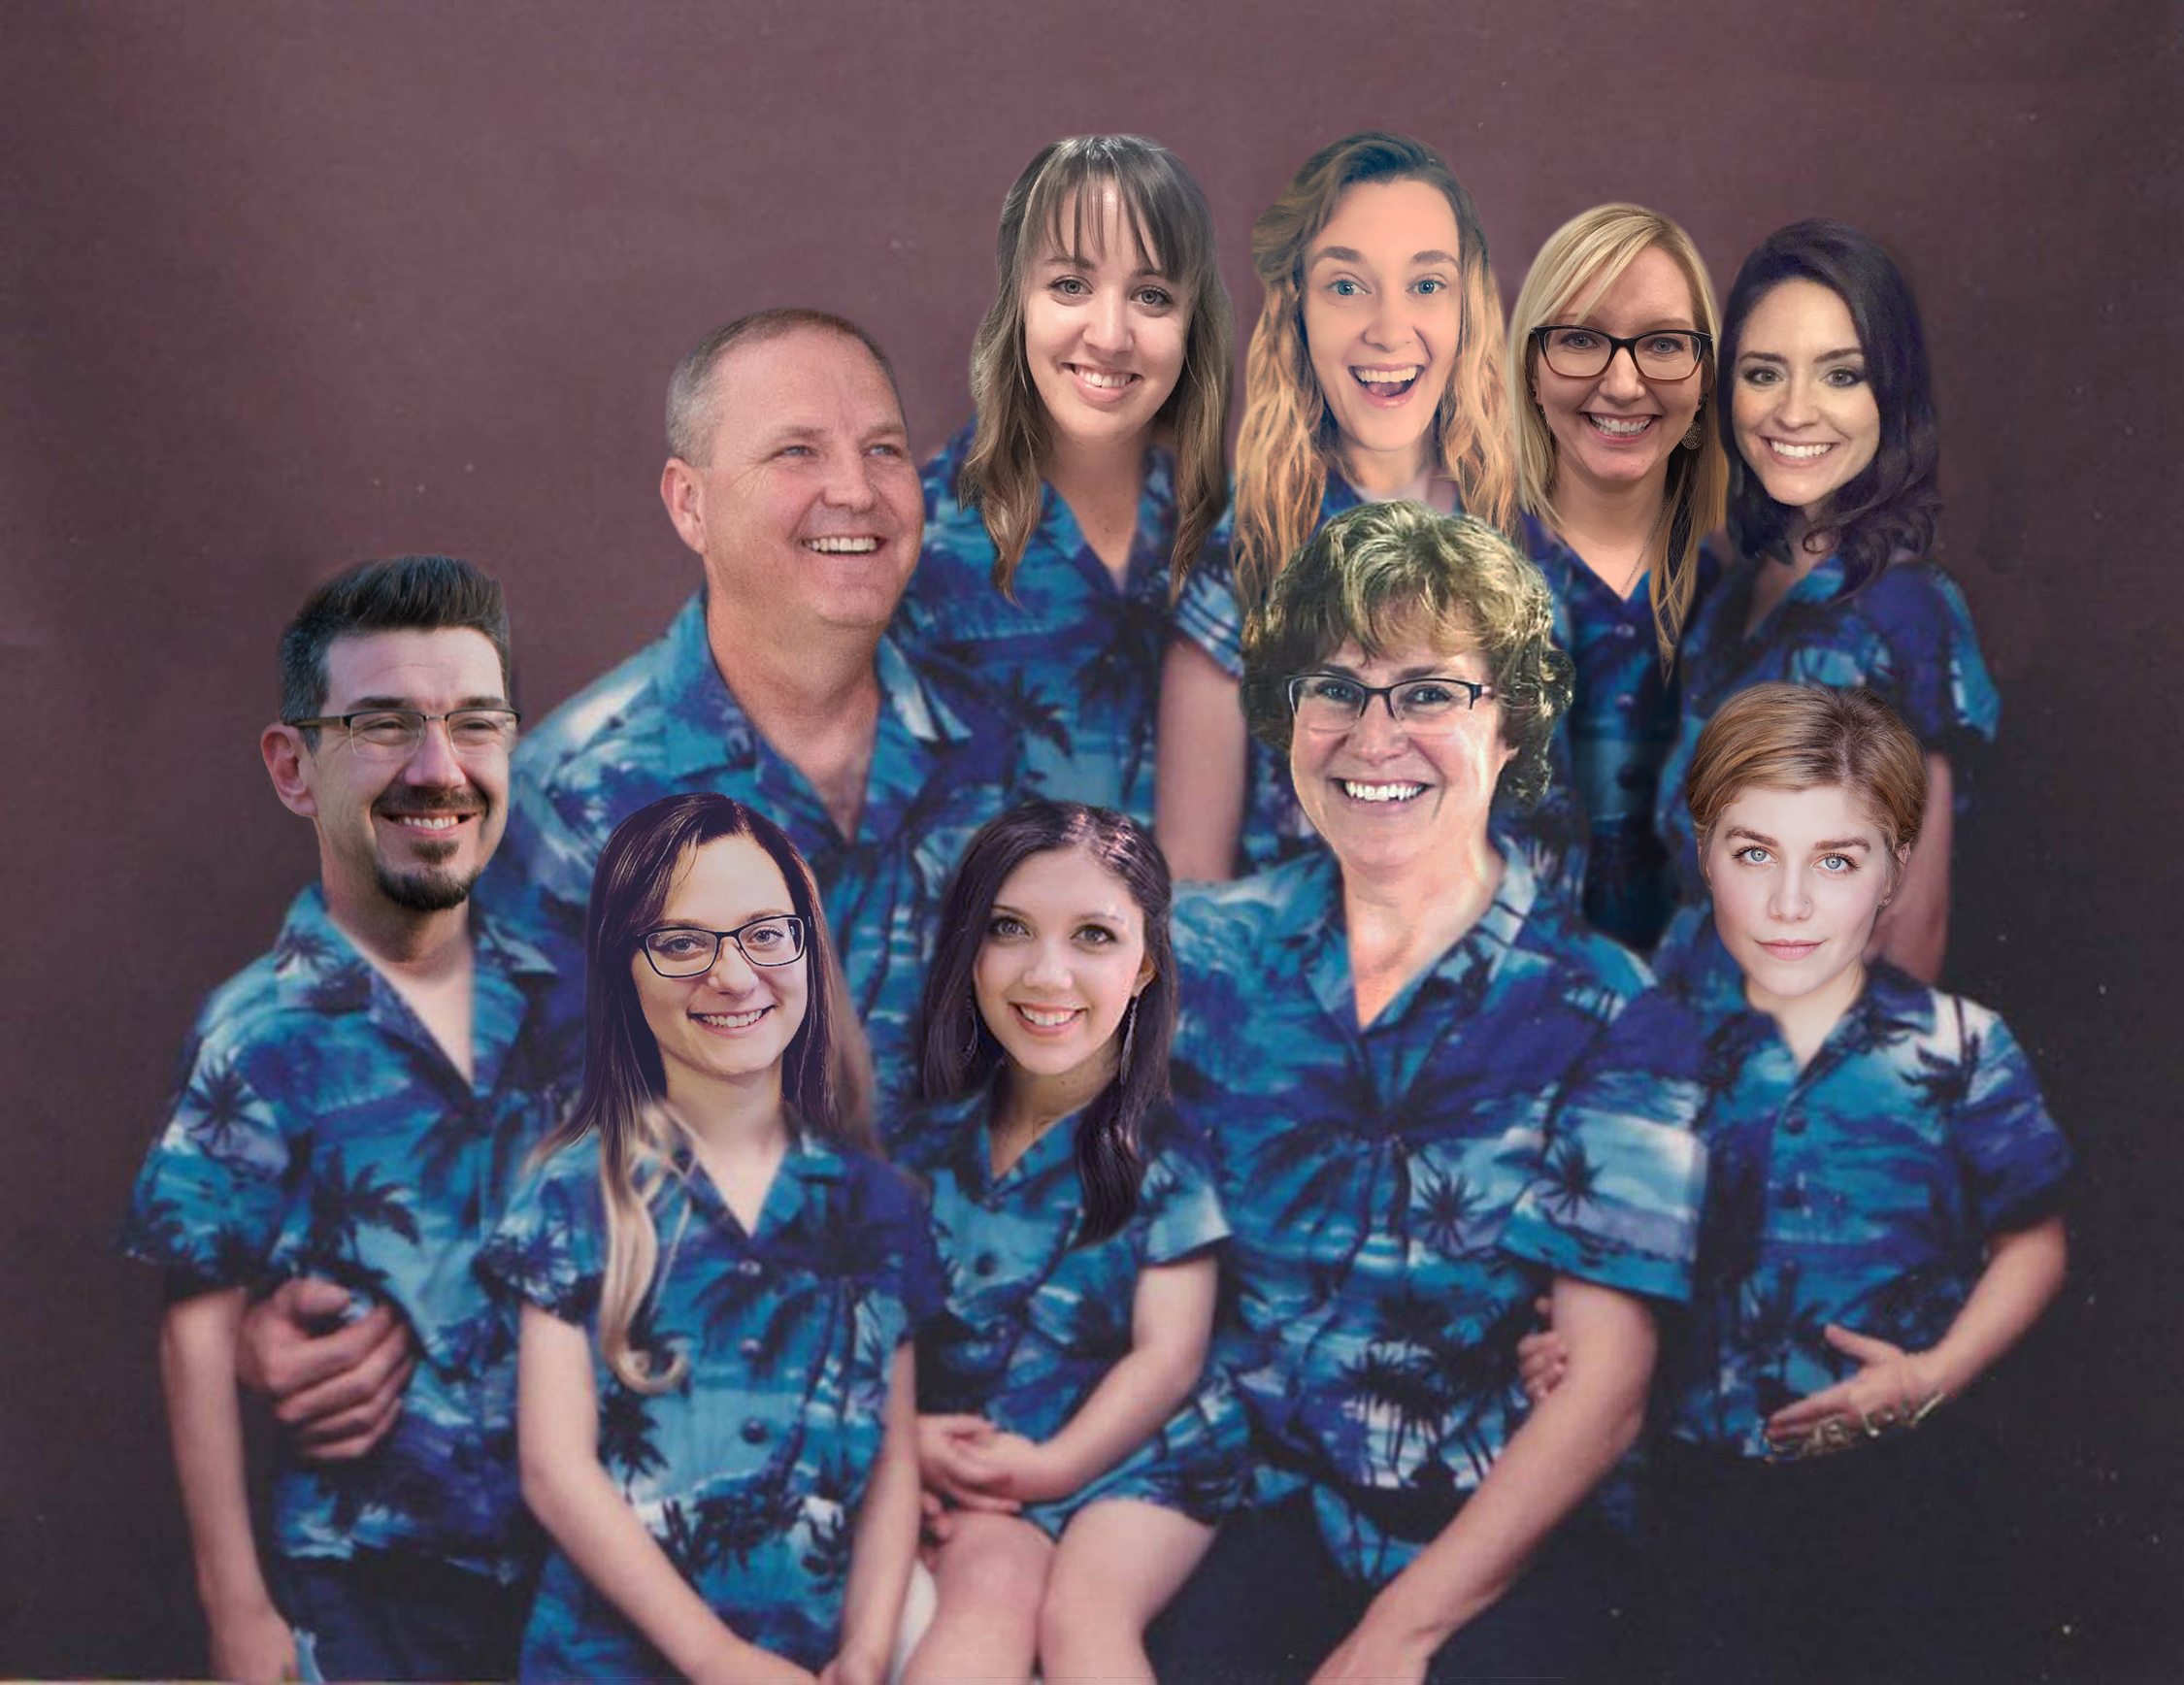 Team SMG awkward family photo with employees dressed in blue tropical shirts. AKA pure awesomeness.